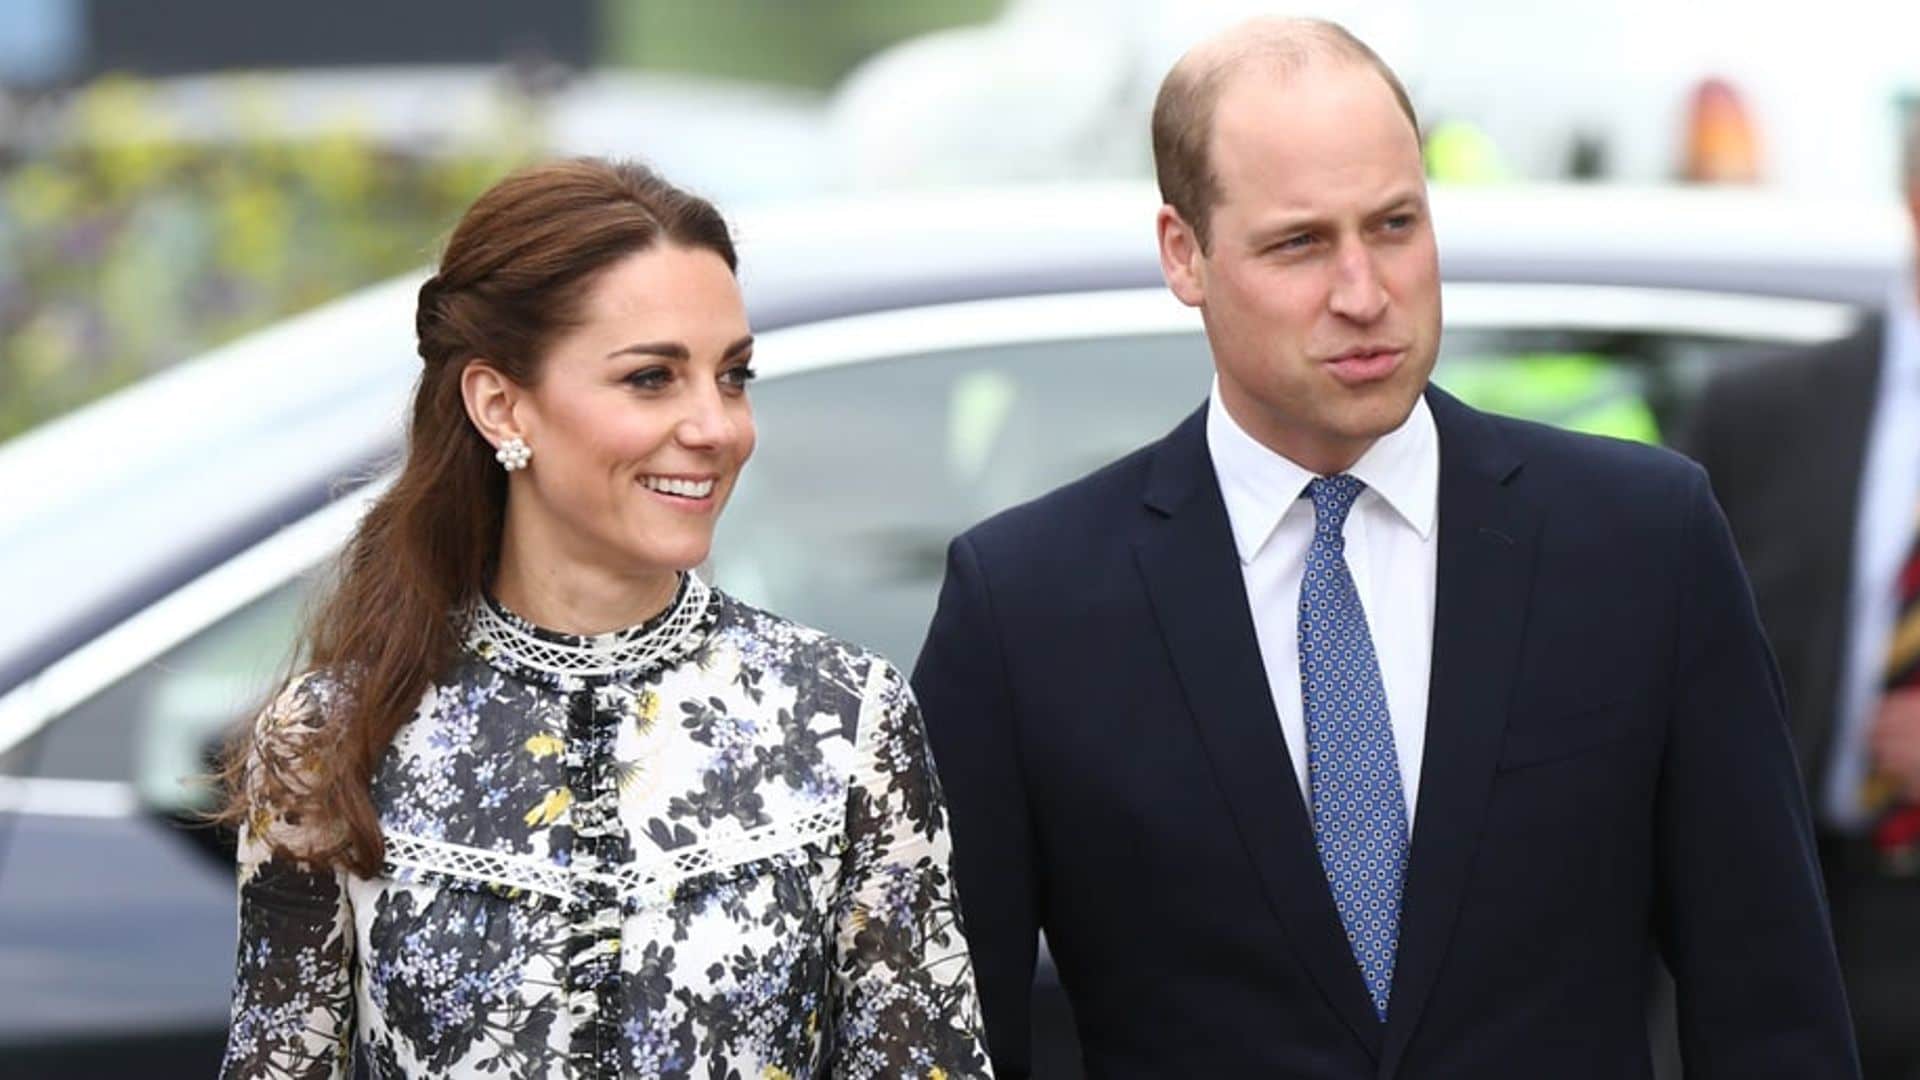 Kate Middleton is in full bloom with her latest look at Chelsea Flower Show